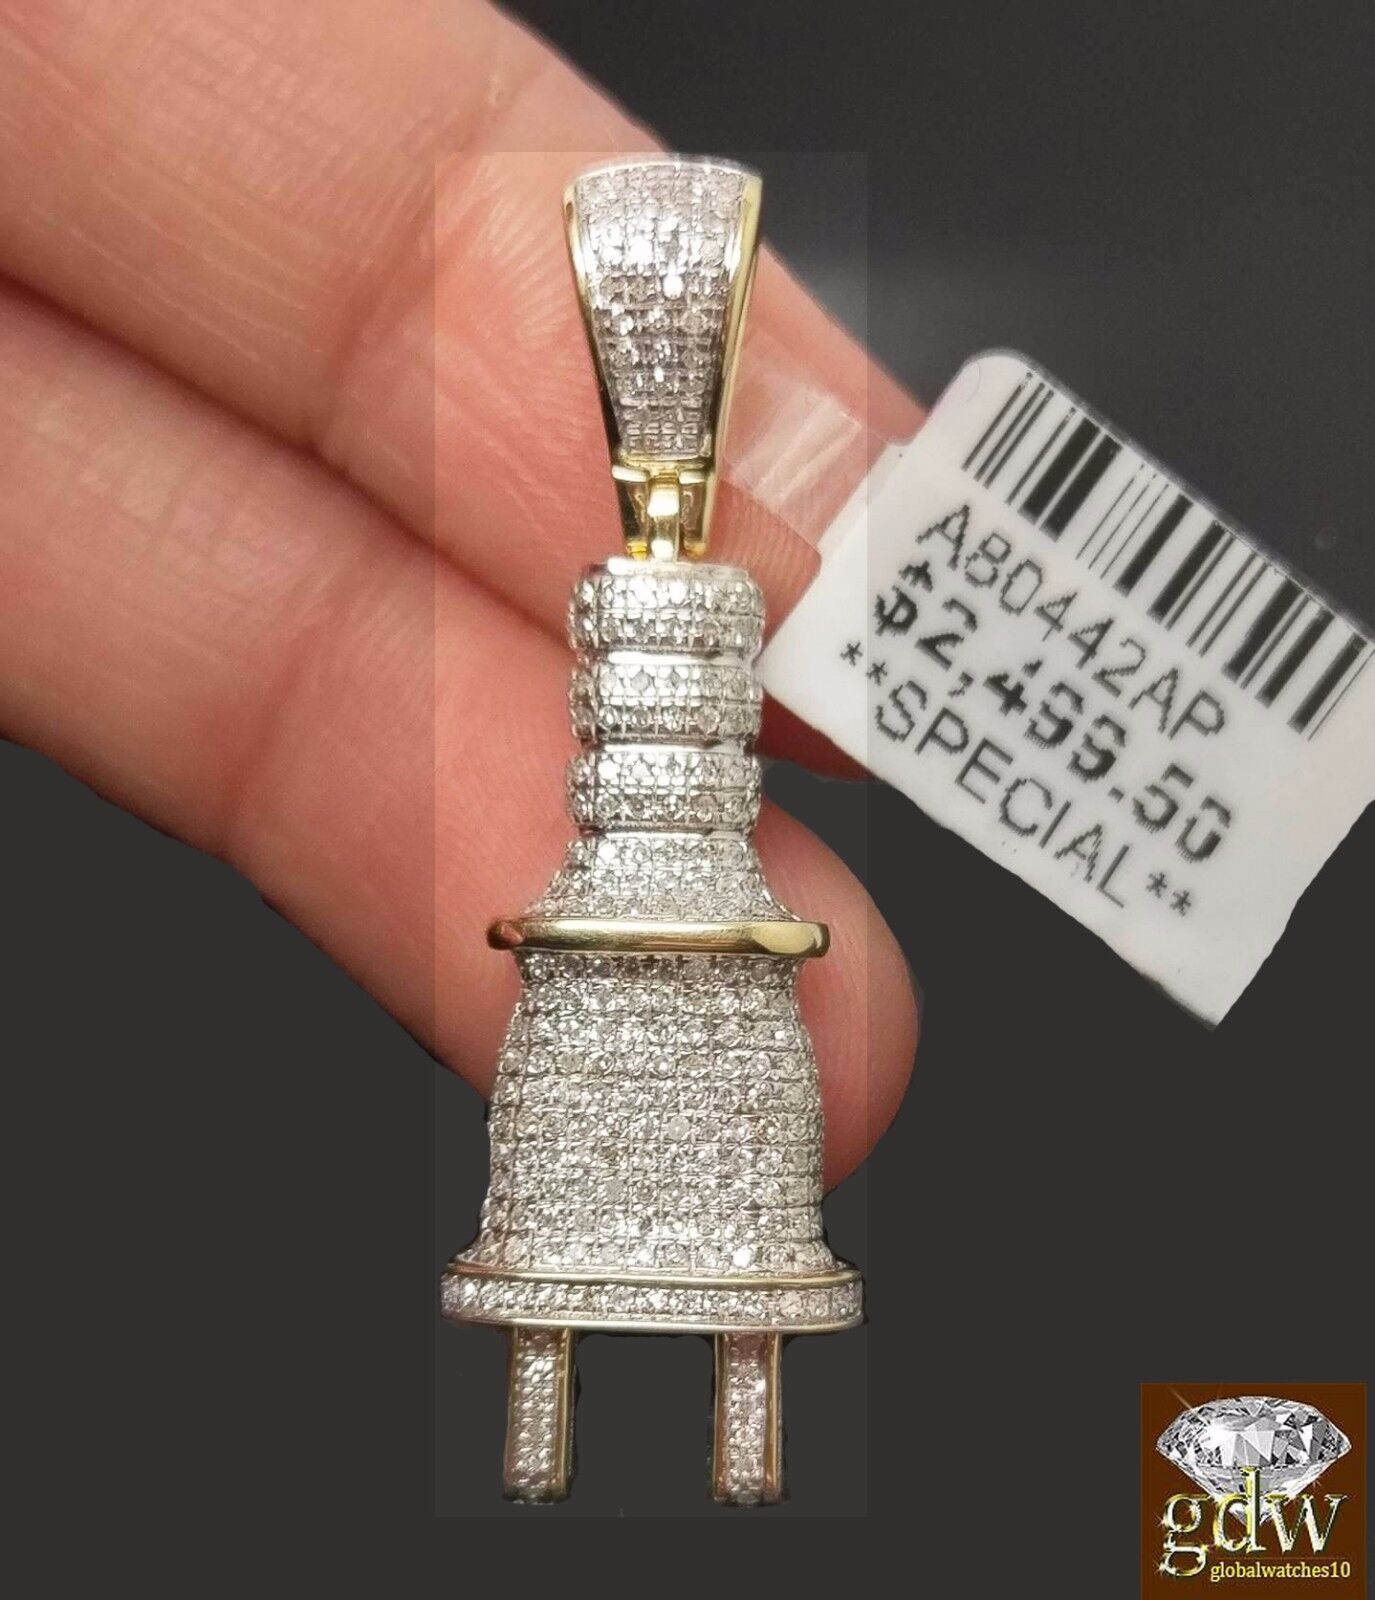 Real 10k Yellow Gold Genuine Diamond Plug Charm Pendent 22 Inch Rope Chain